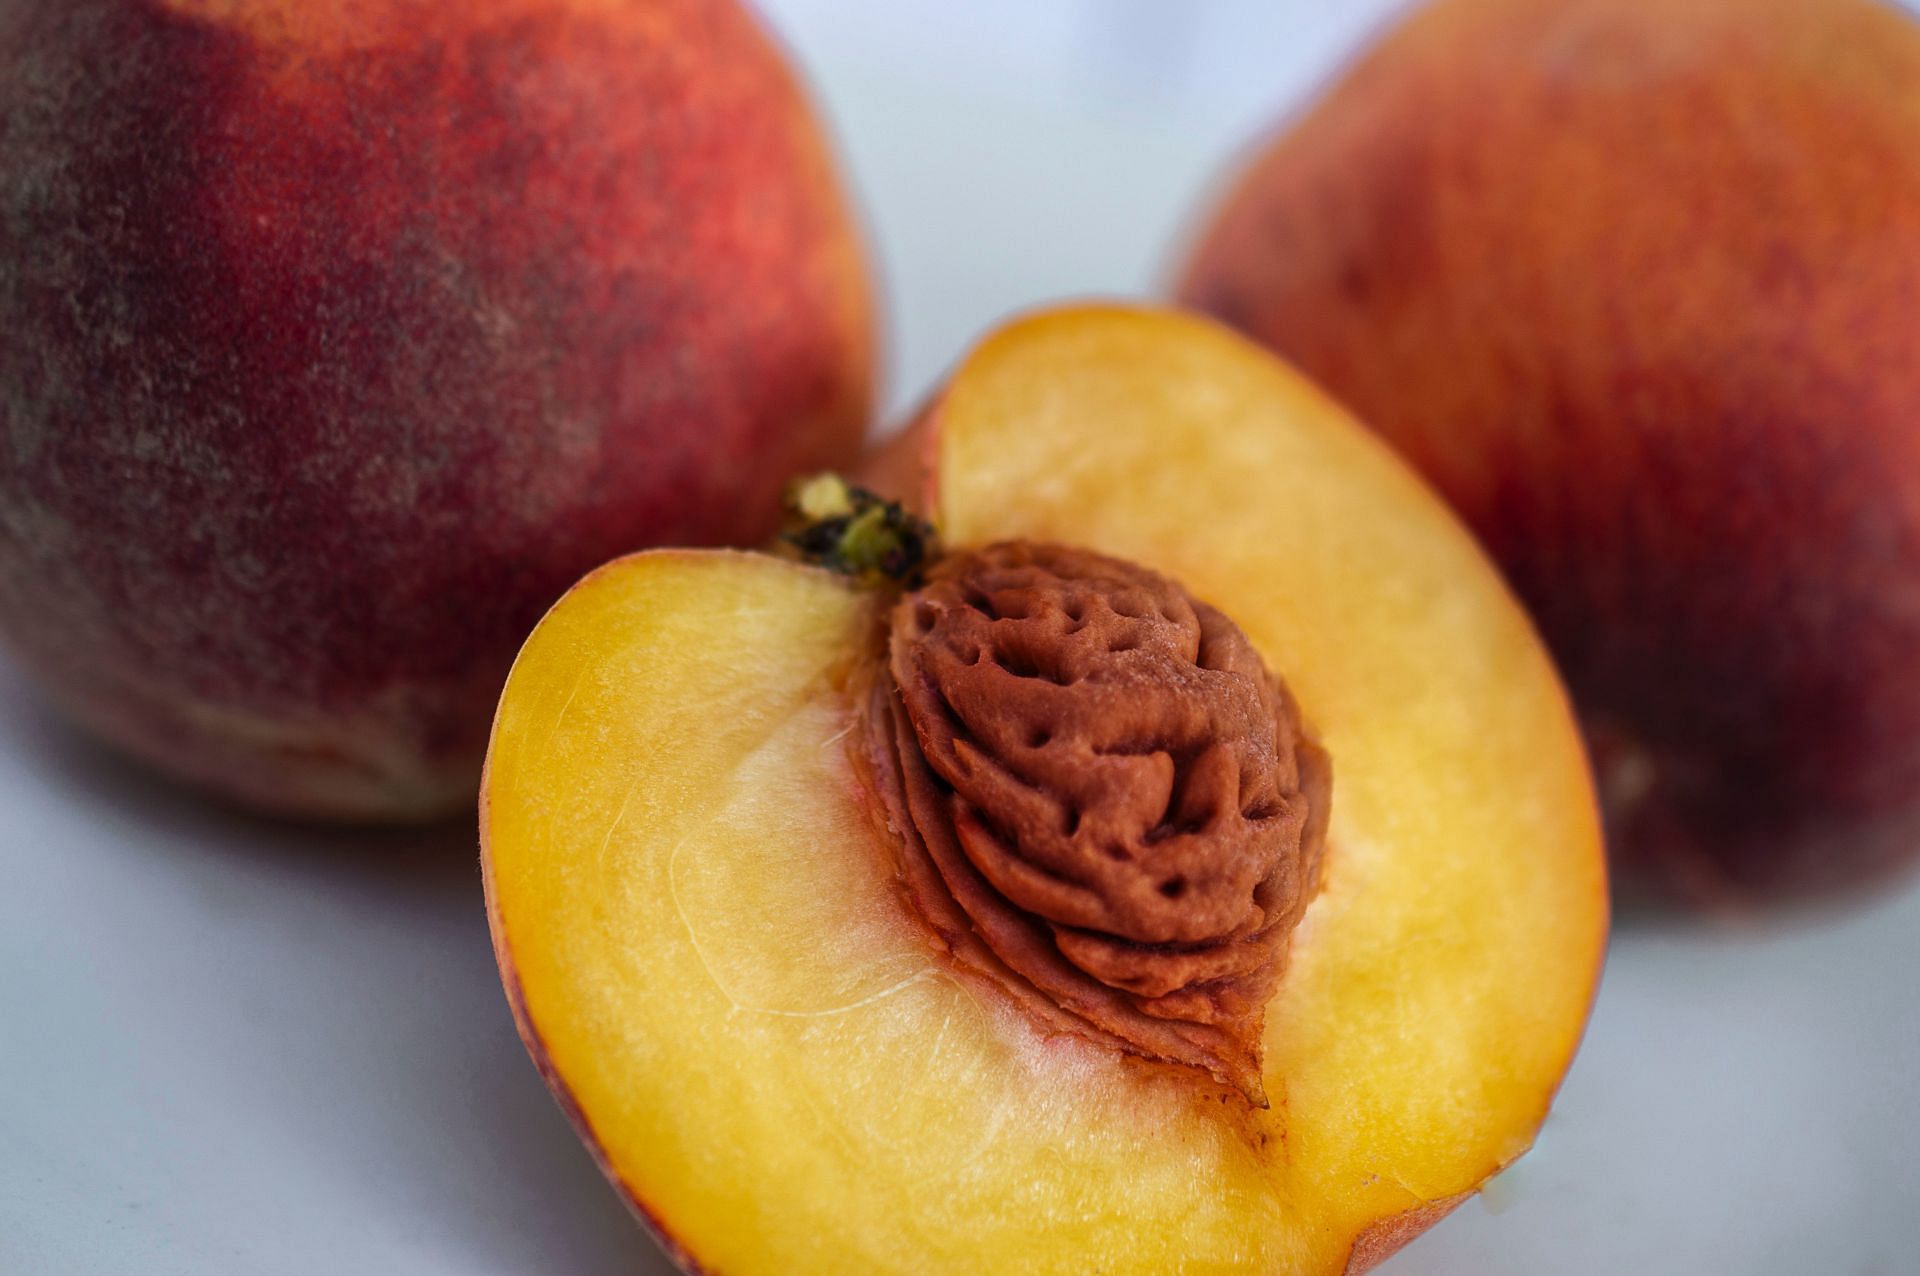 There is about 68 calories in a peach. (Image via Unsplash / Sara Cervera)